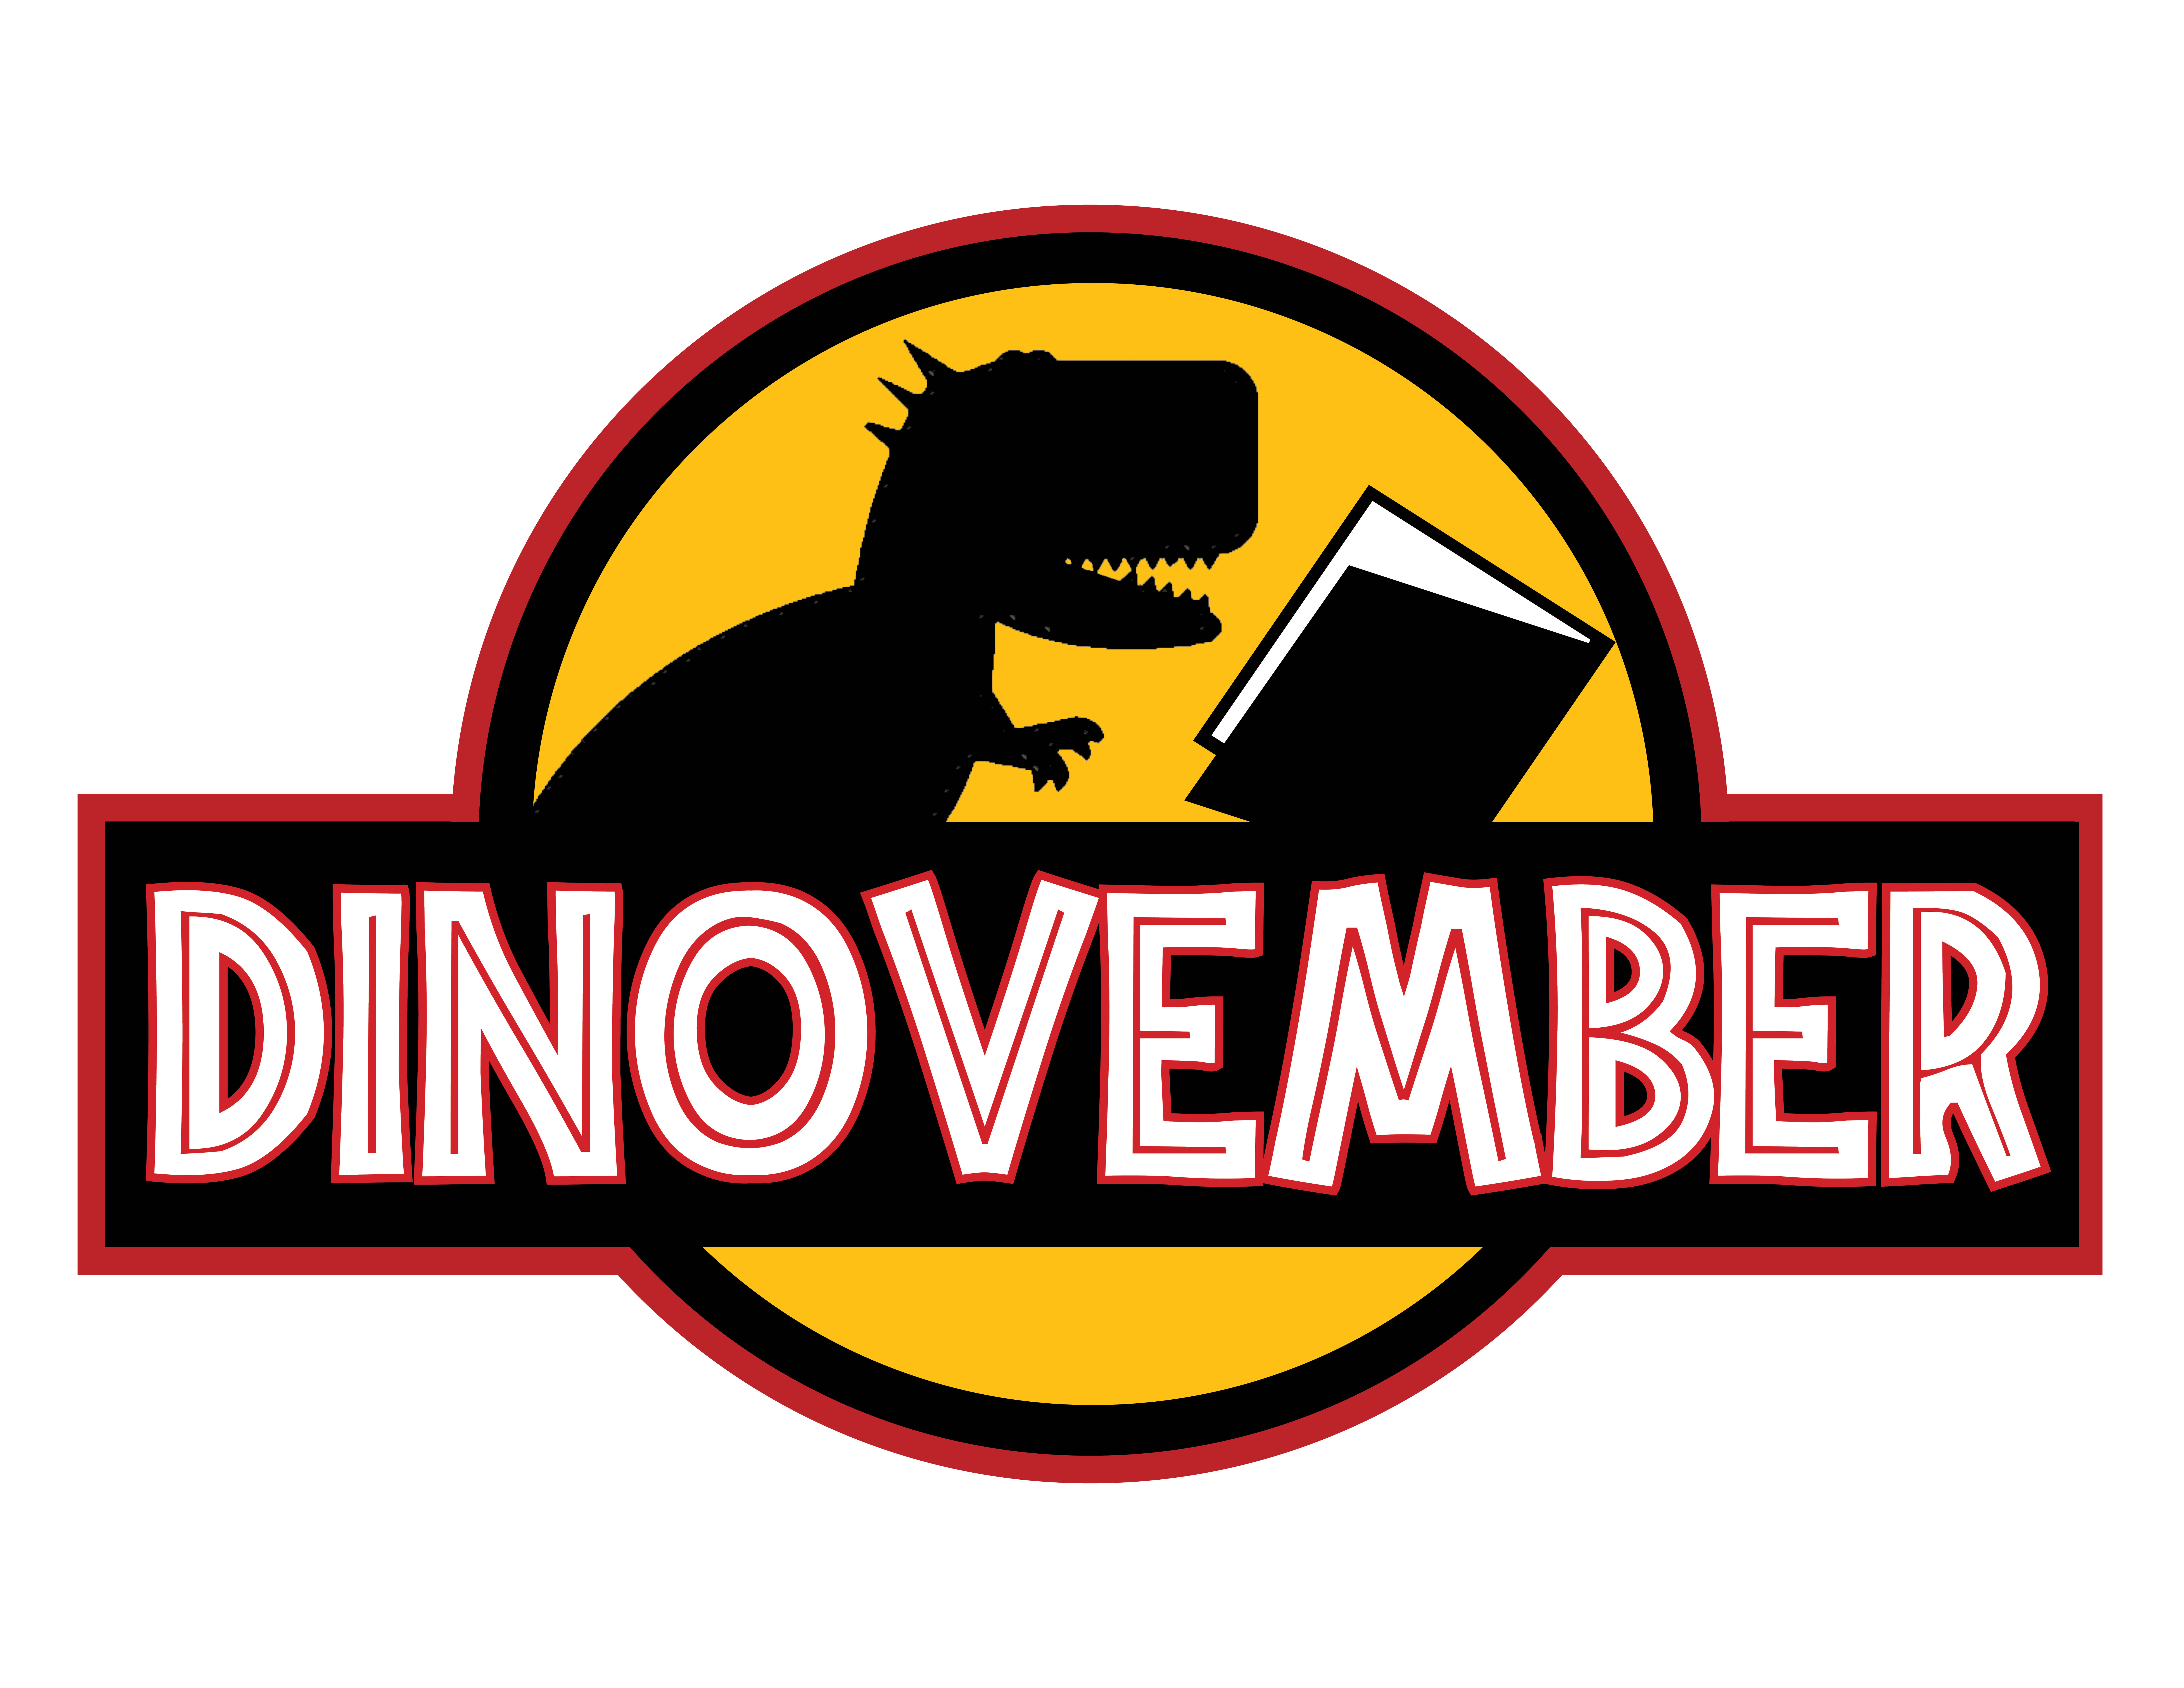 Tear into great books & activities during DiNovember at FDLPL